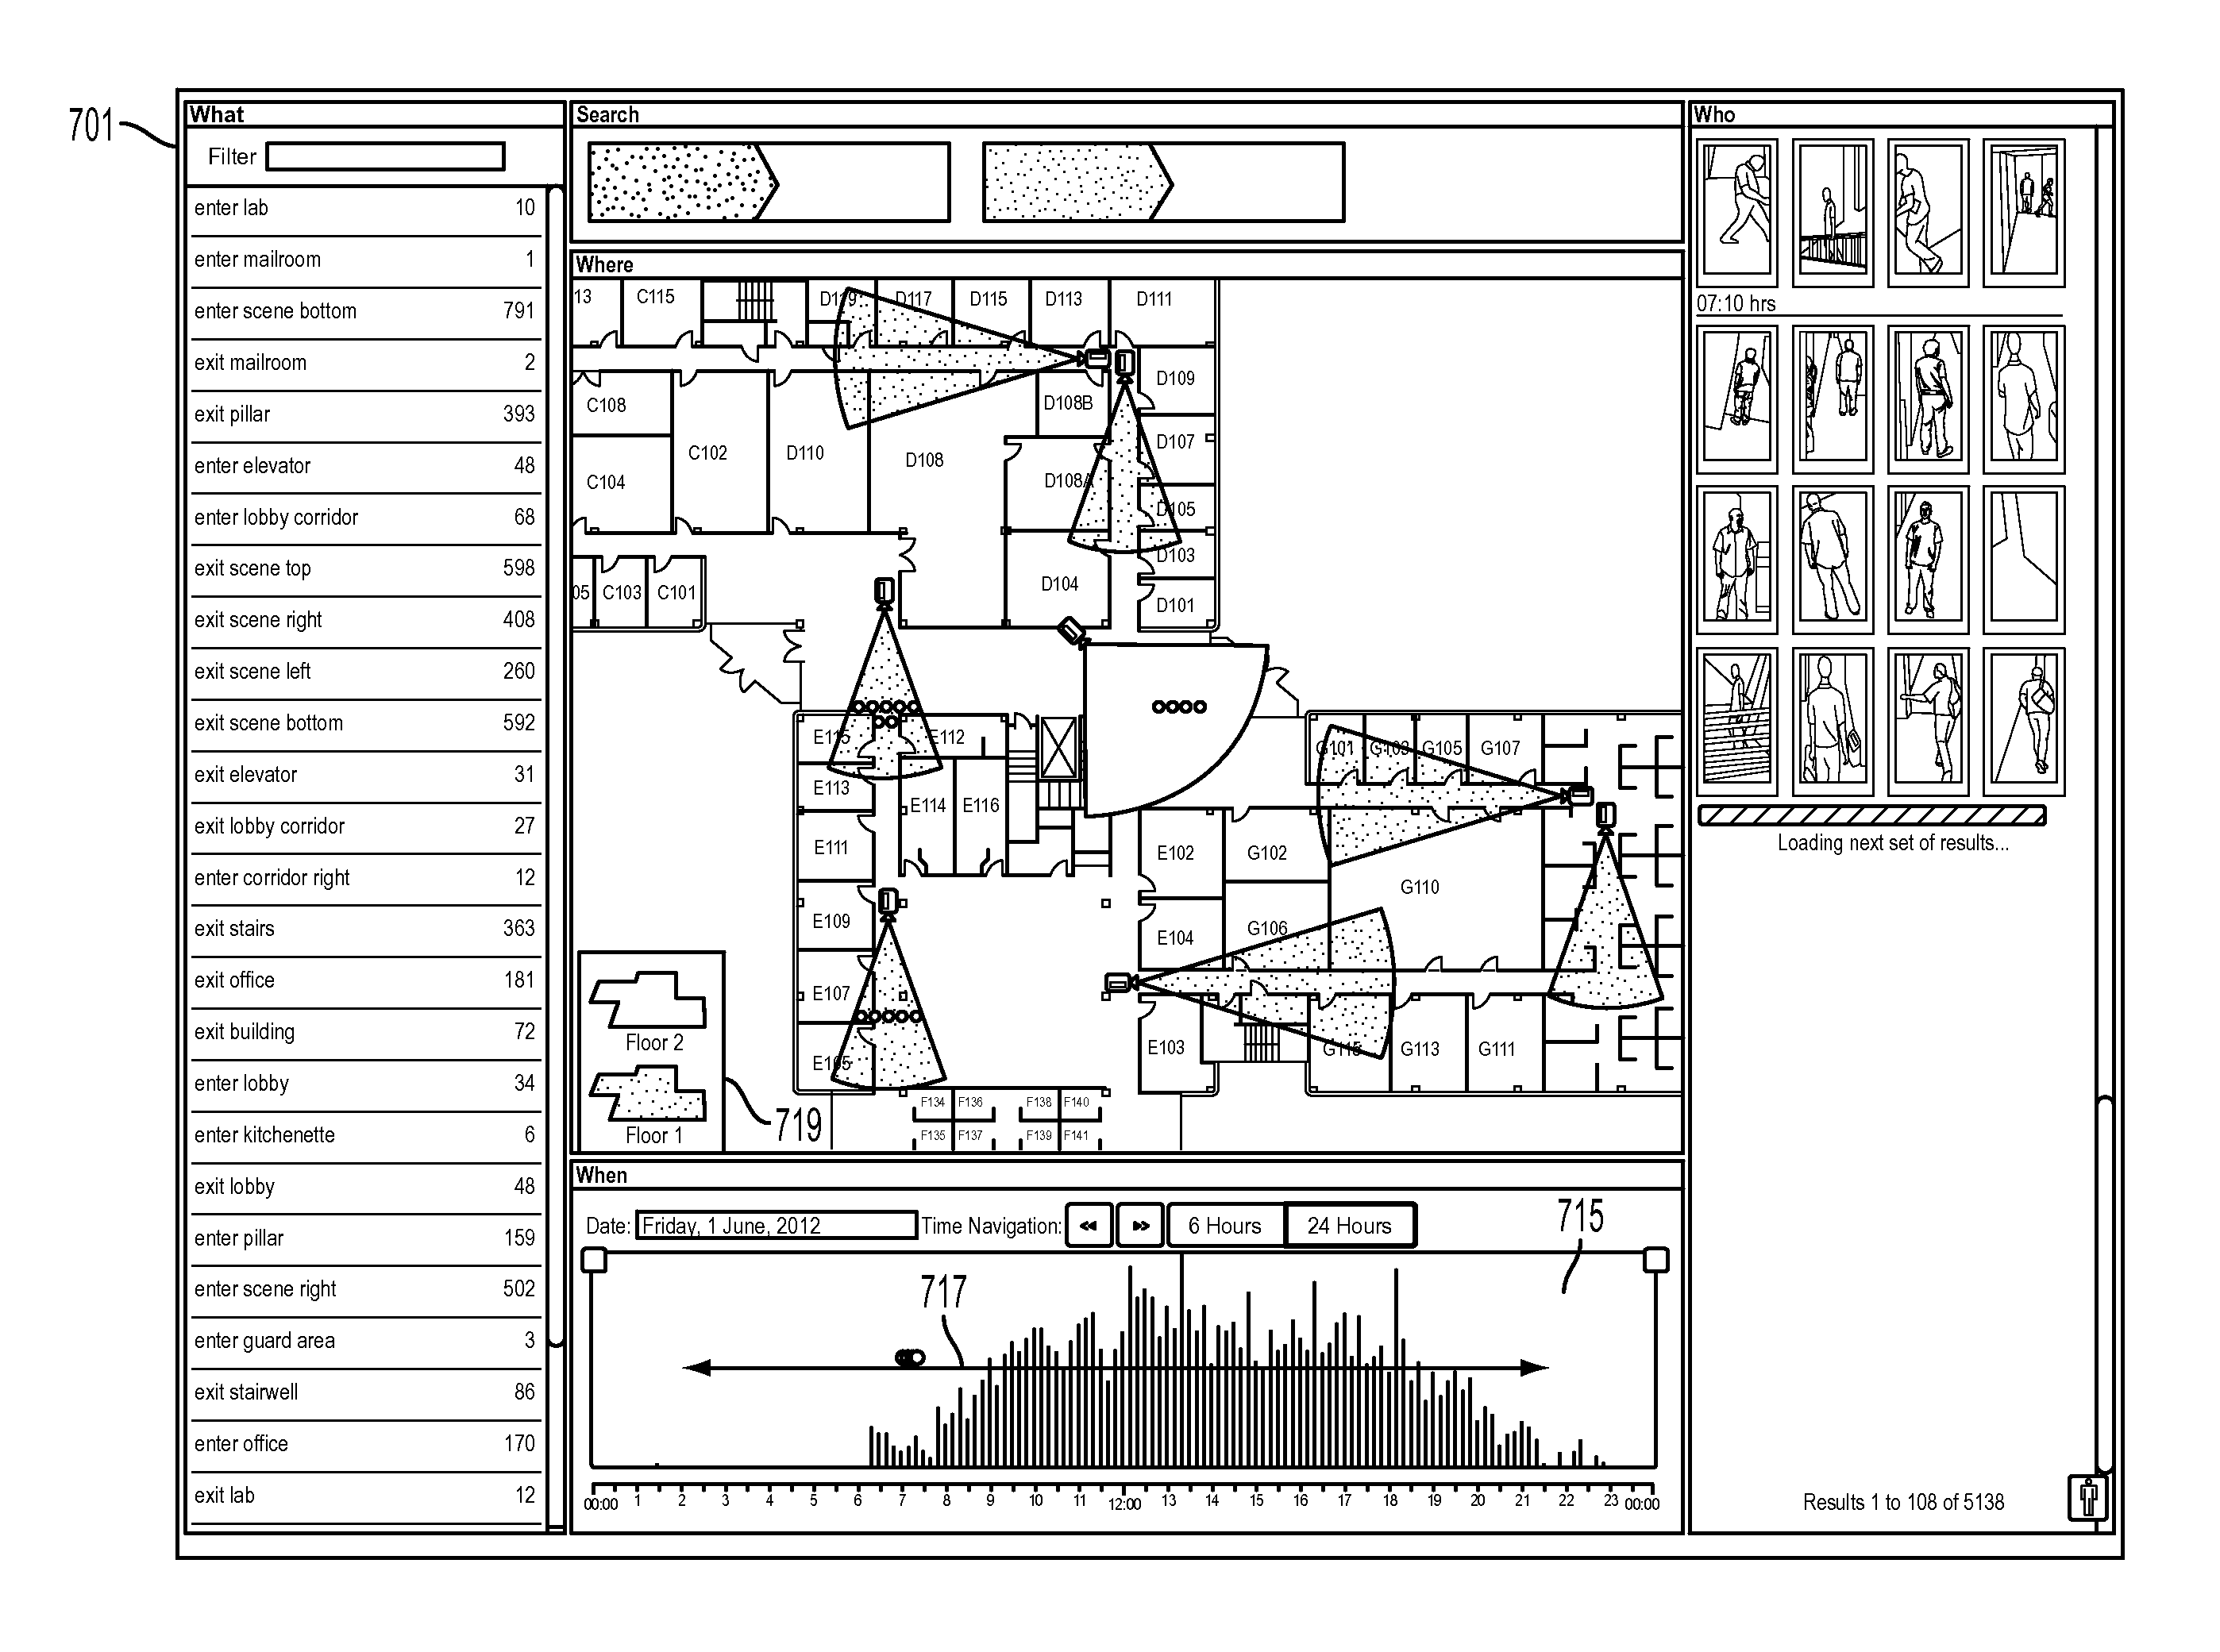 Method and user interface for forensic video search